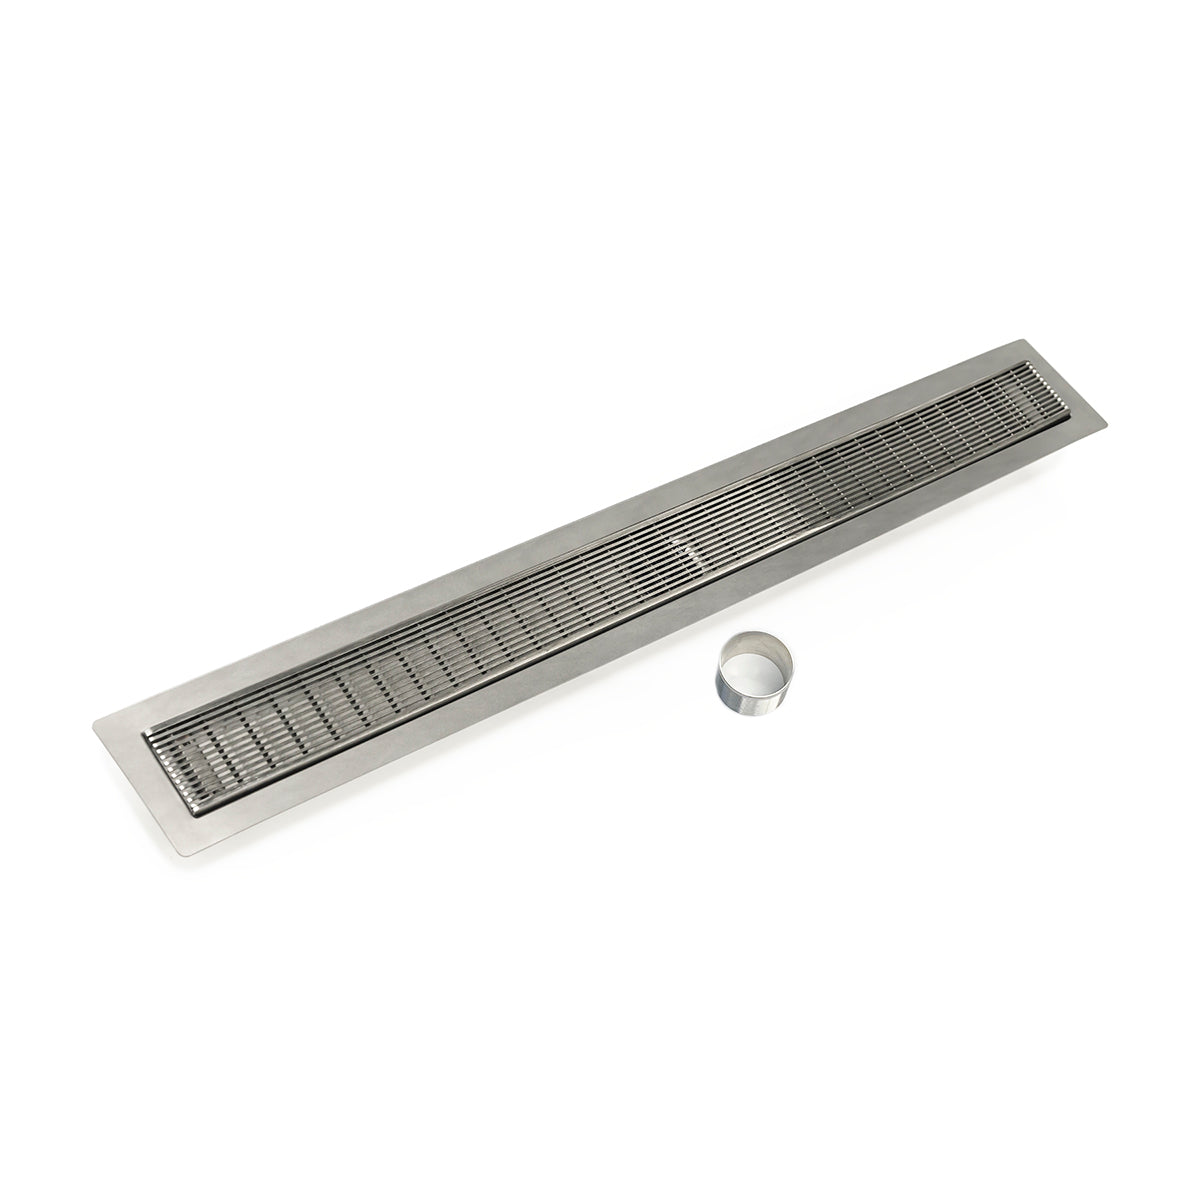 Infinity Drain 32" FCB Series Double Waterproofing Linear Drain Kit with 2 1/2" Wedge Wire Grate